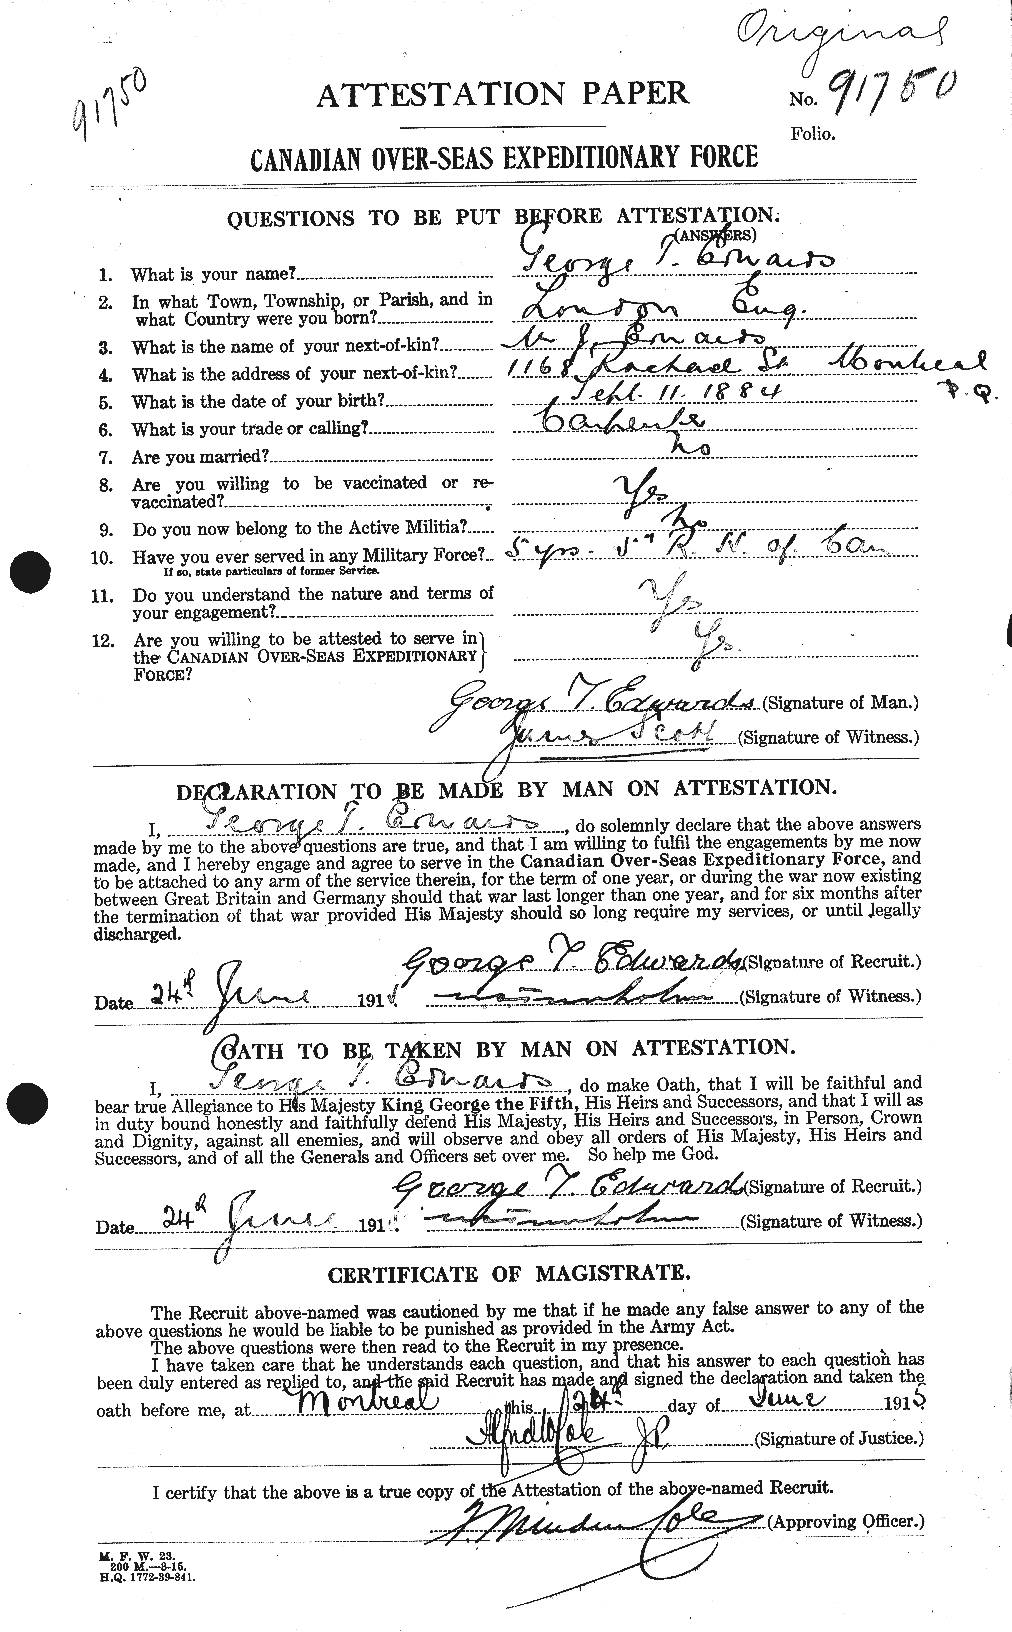 Personnel Records of the First World War - CEF 309692a